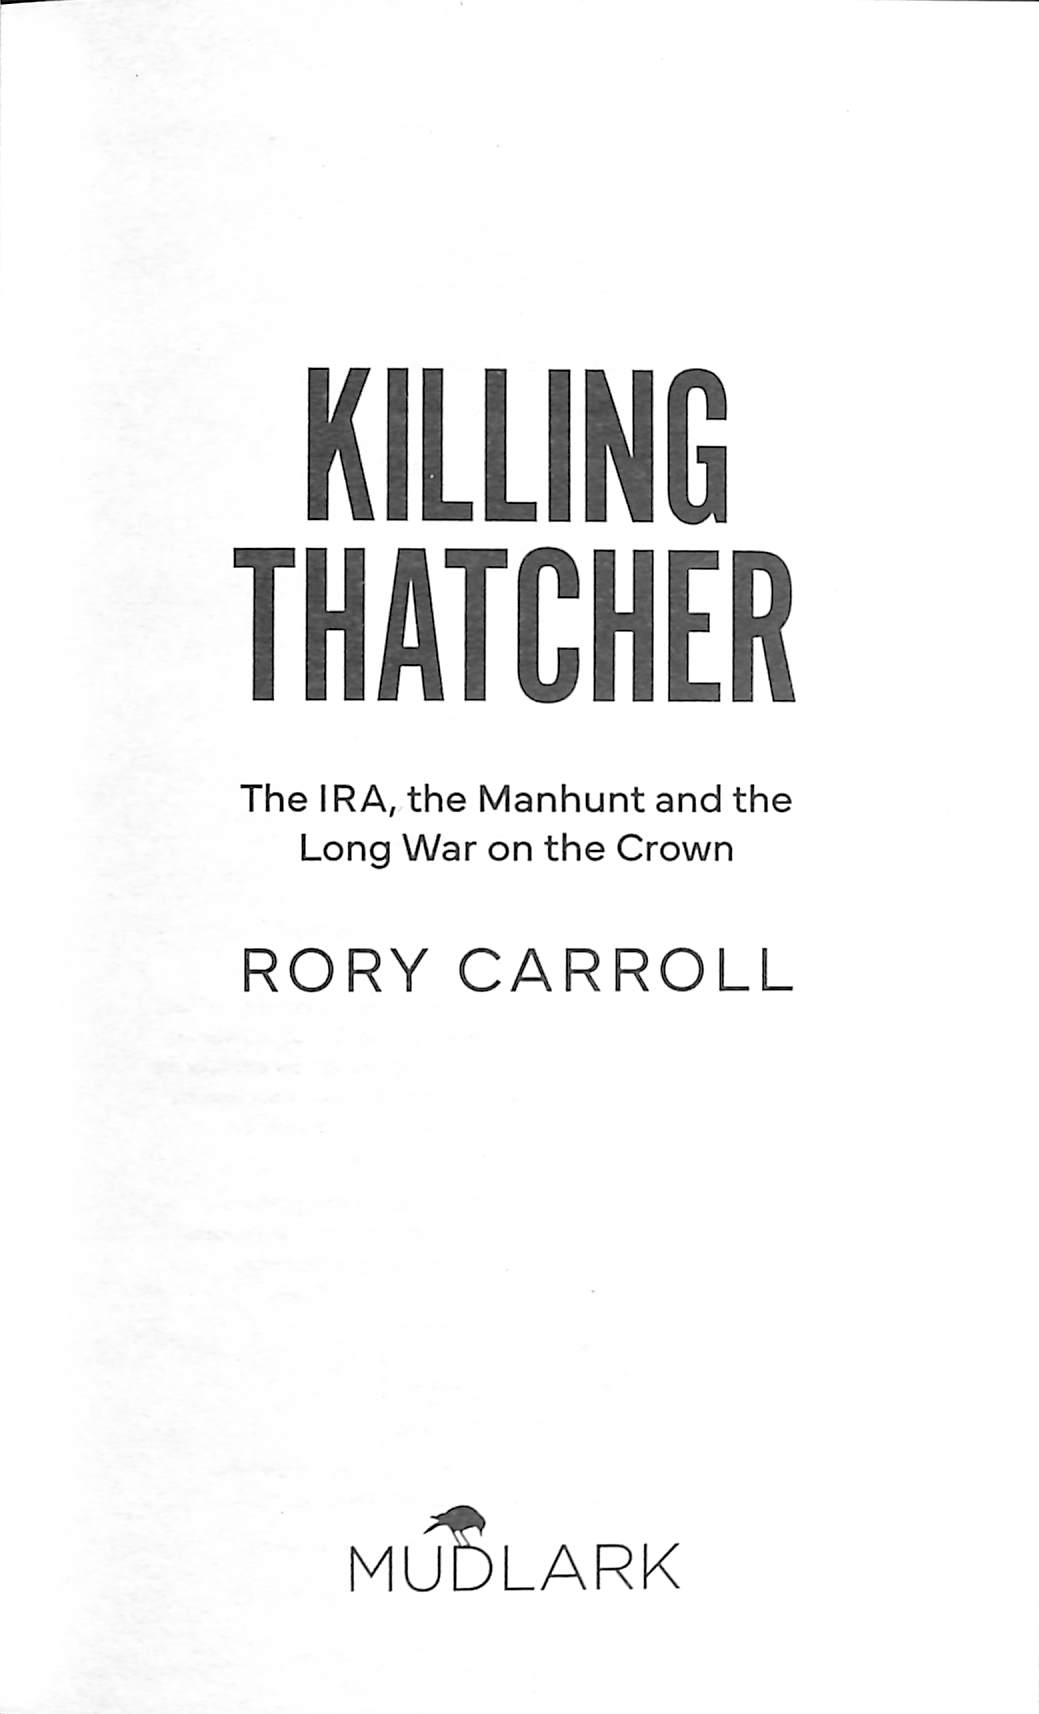 Killing Thatcher by Rory Carroll